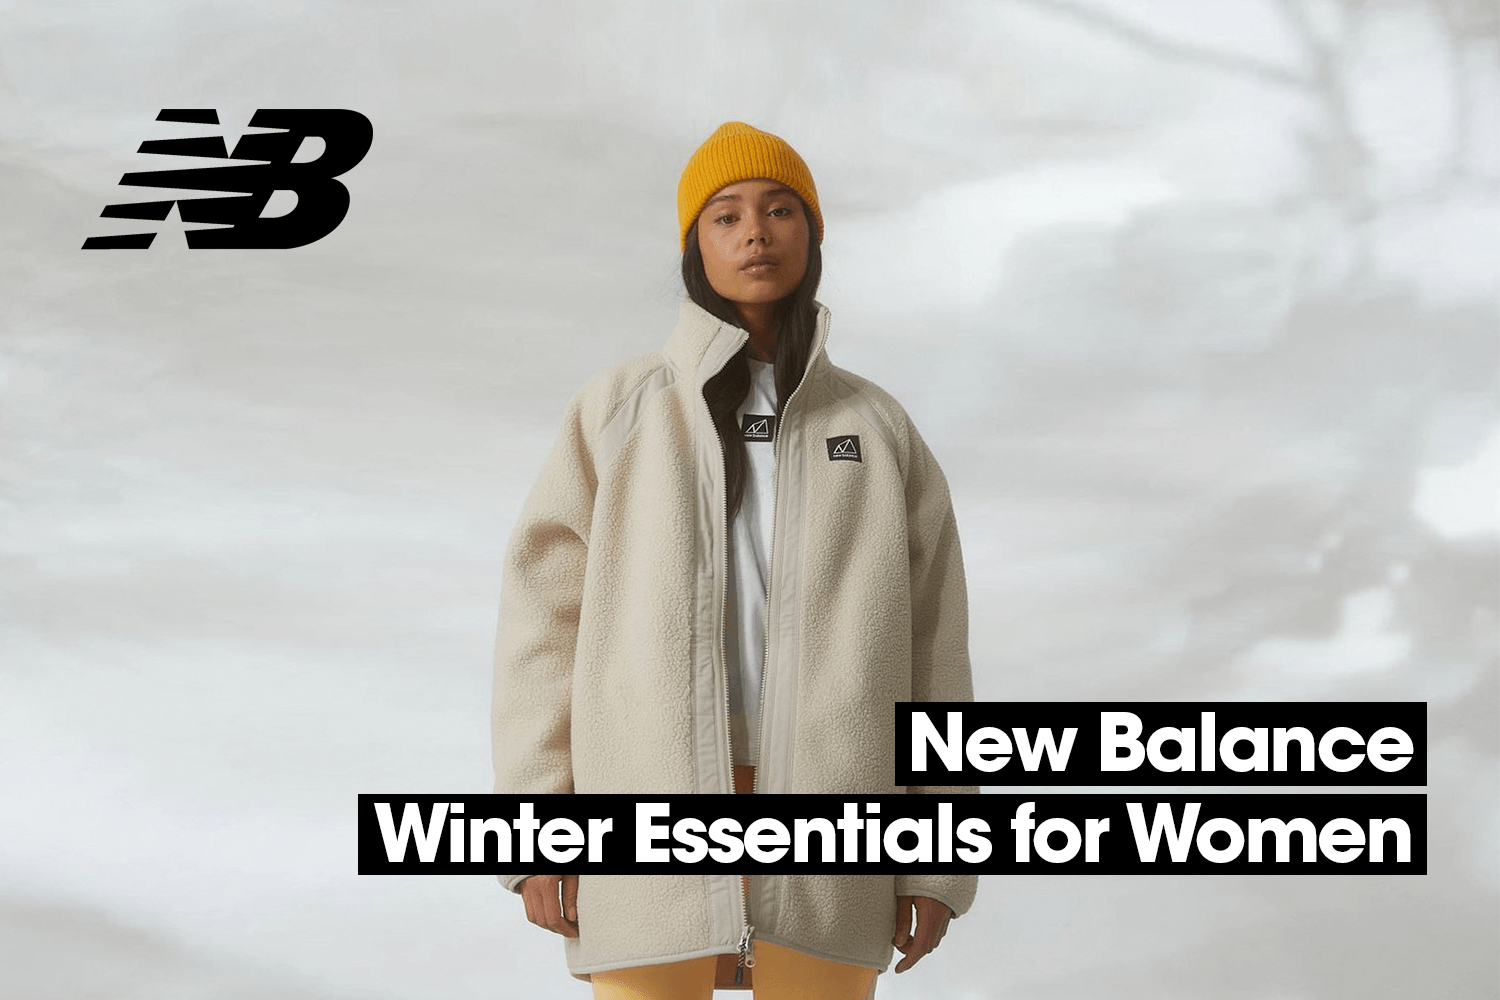 Shop now the New Balance Winter Essentials for the ladies